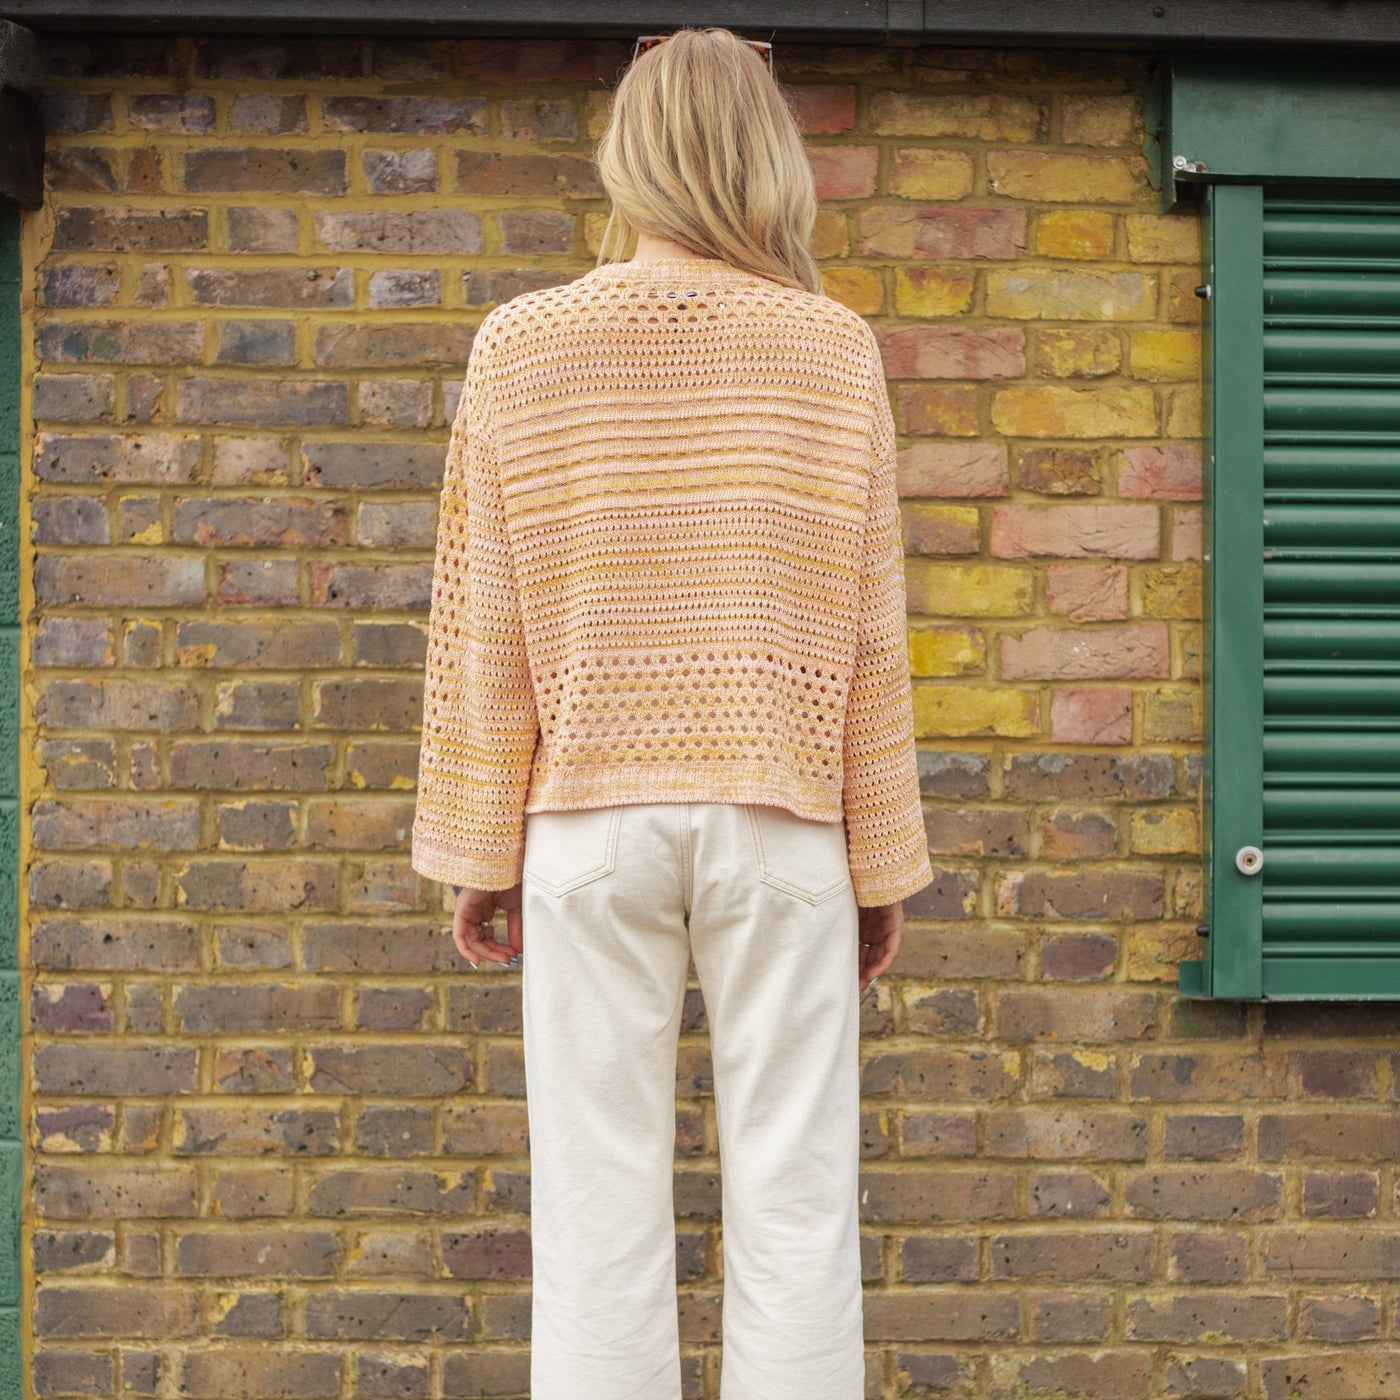 Gala Recycled Cotton Mix Pointelle Wide Sleeve Jumper - Orange